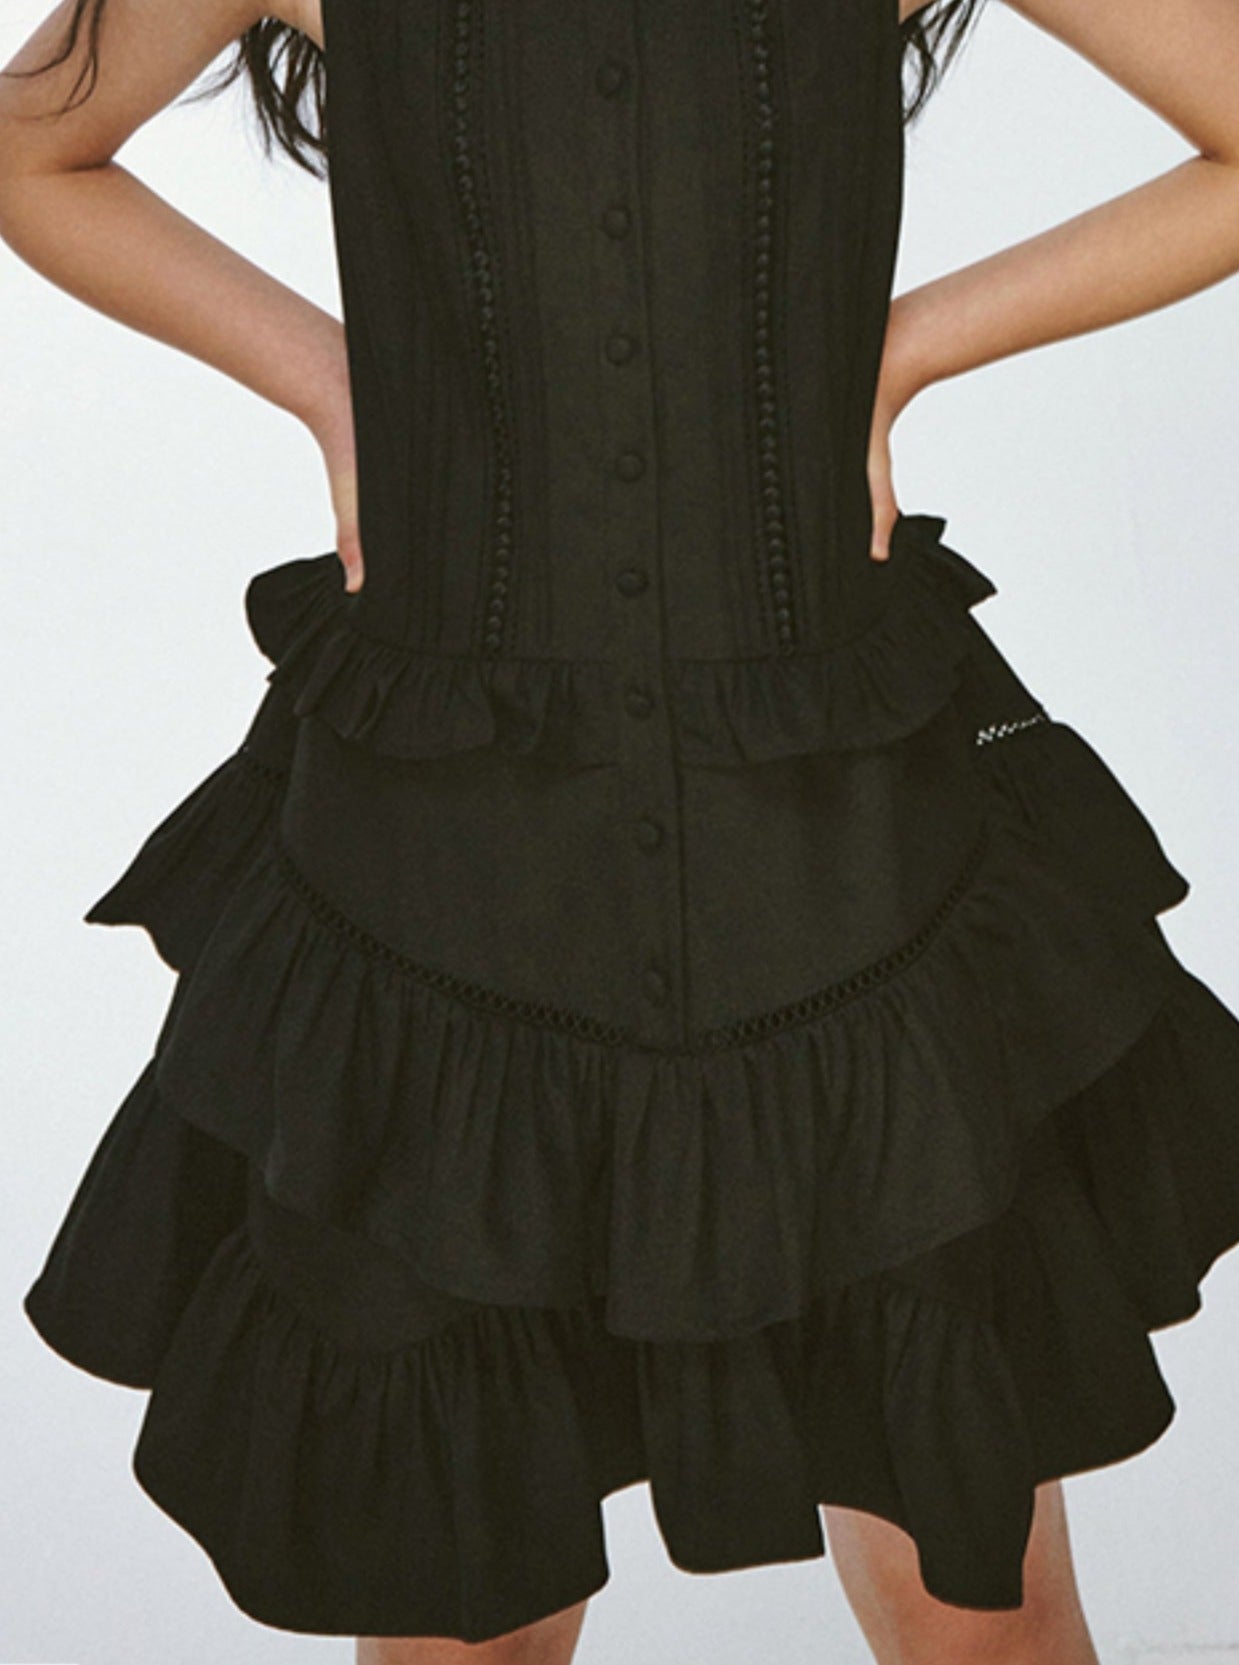 Heavy Industry Black Hanging French Dress